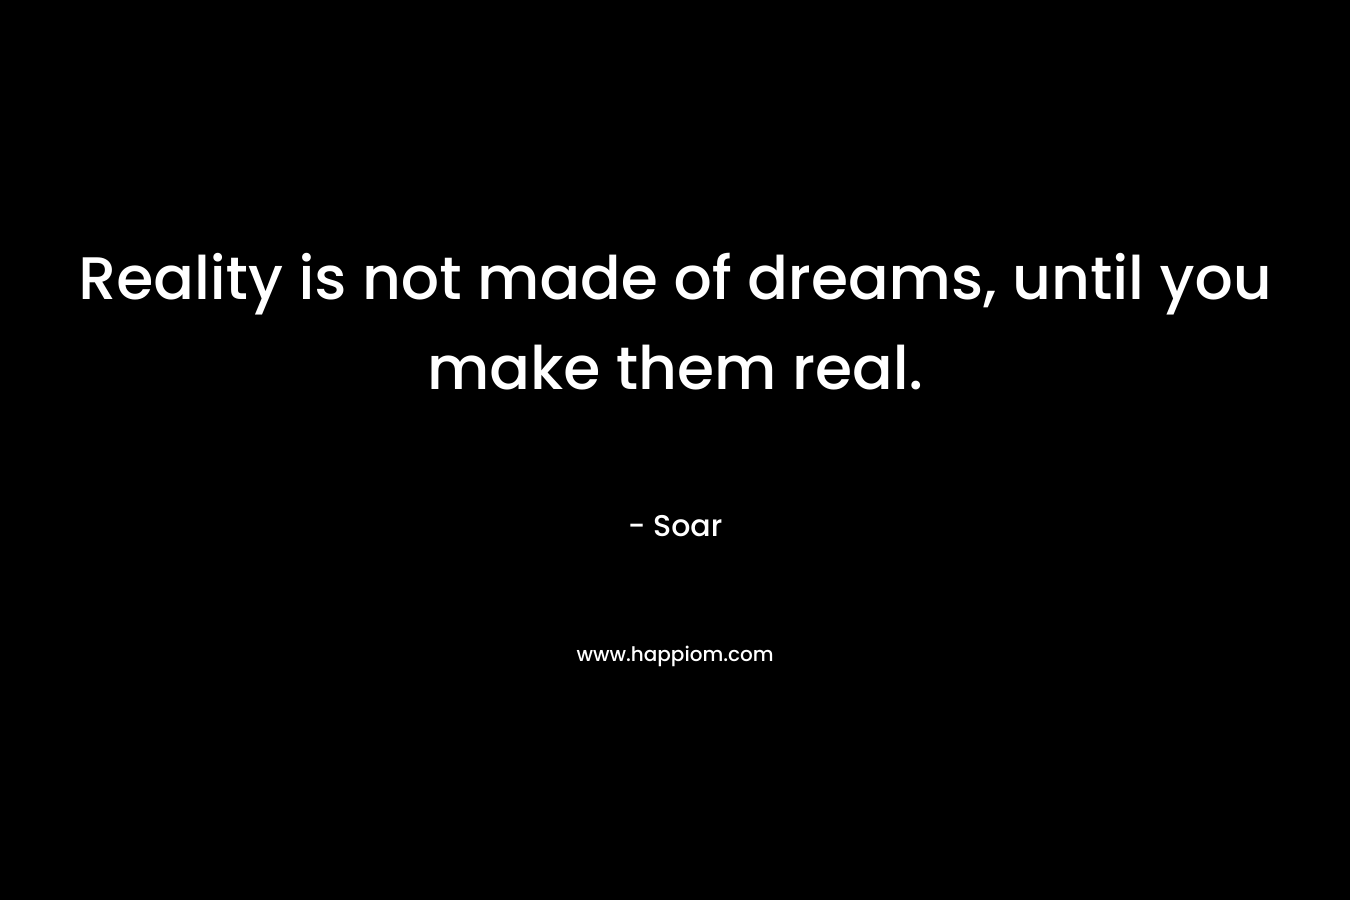 Reality is not made of dreams, until you make them real.